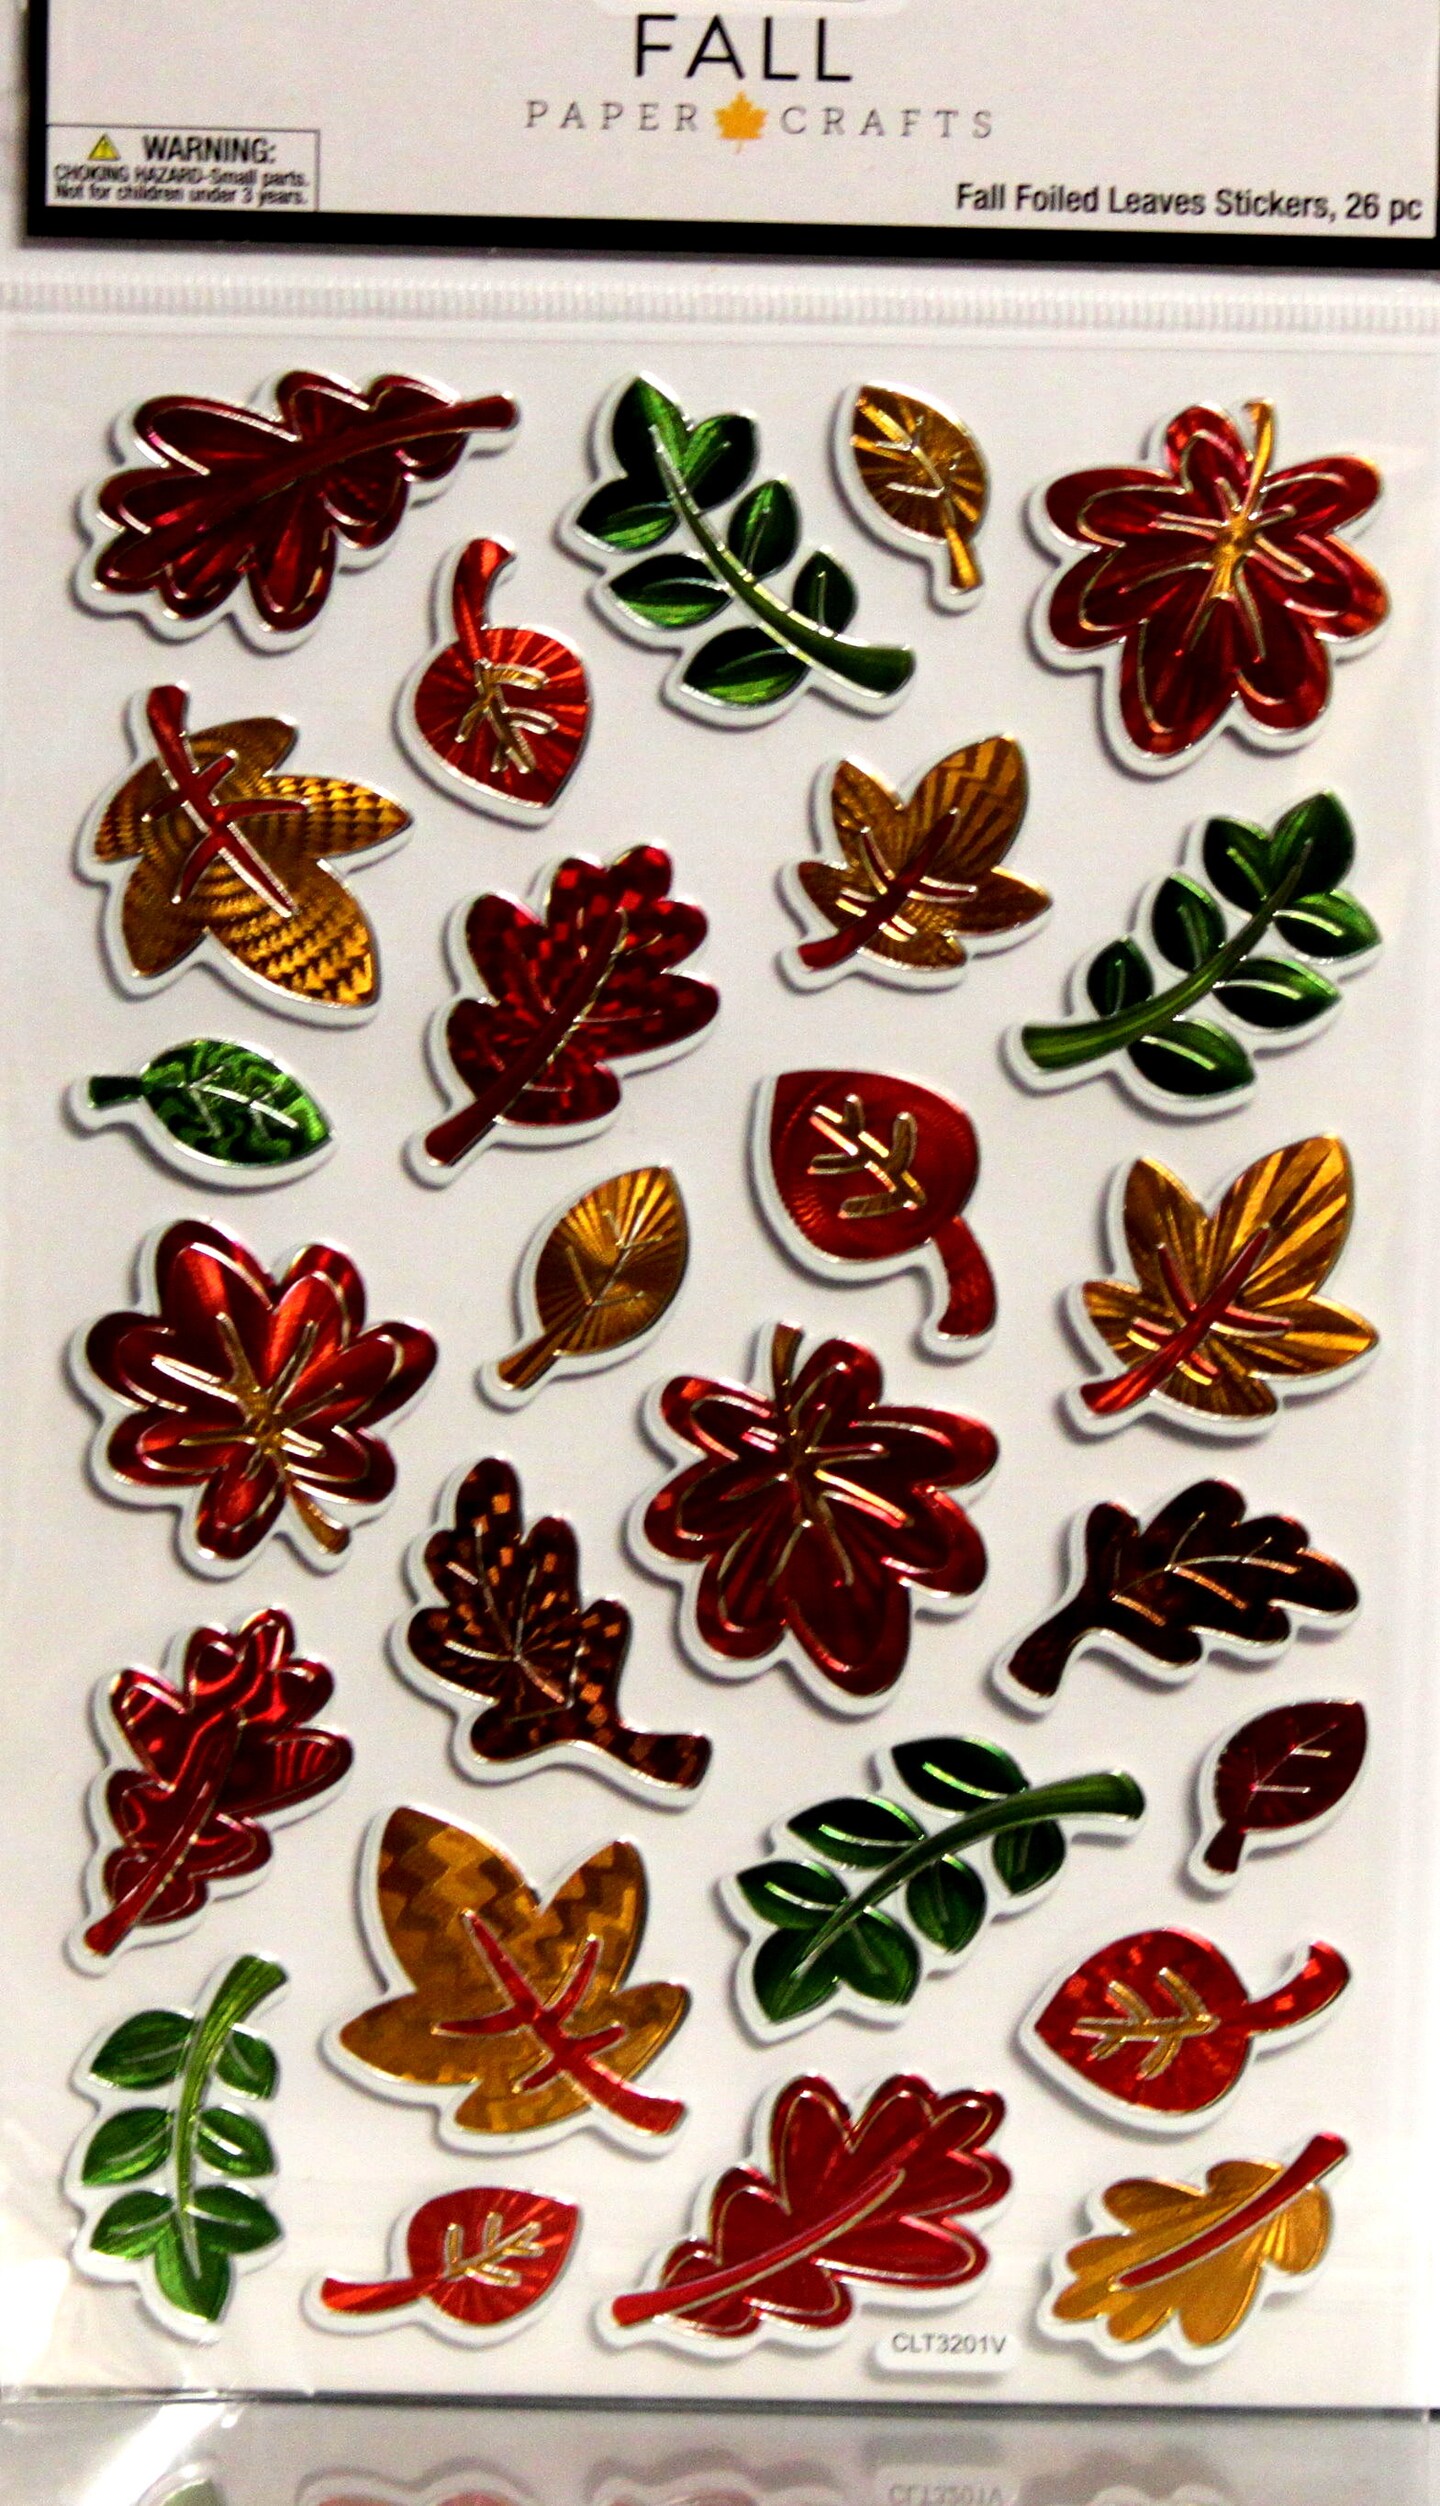 Fall Paper Crafts Fall Foiled Leaves Stickers